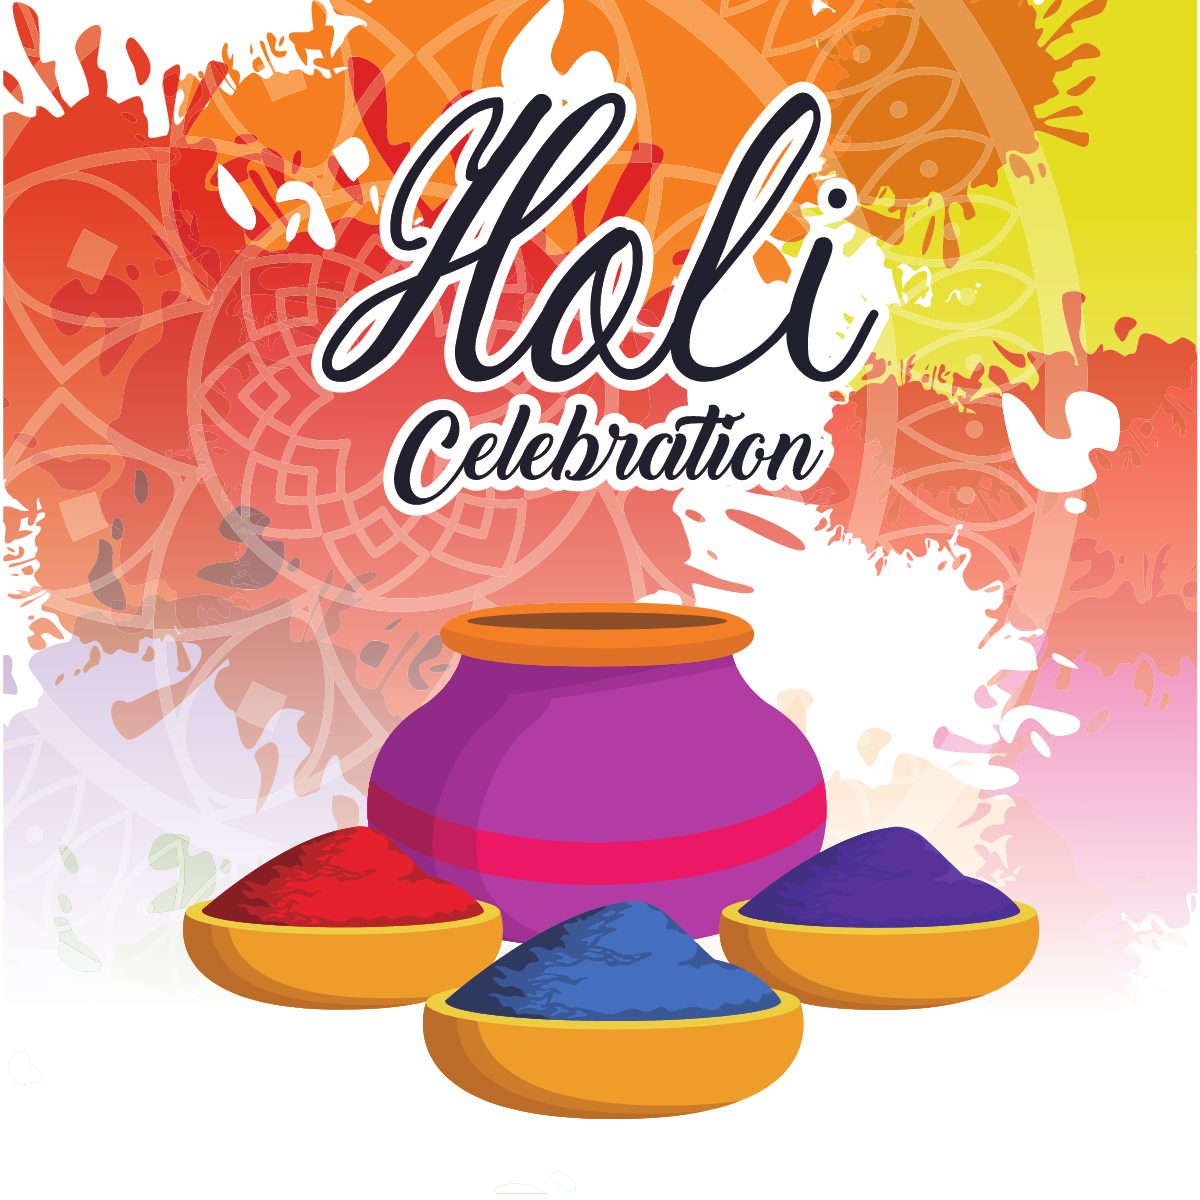 Happy Holi 2023 Wishes in Advance: Quotes, Images, Greetings, Messages, Sayings, Posters, Banners, and Shayari